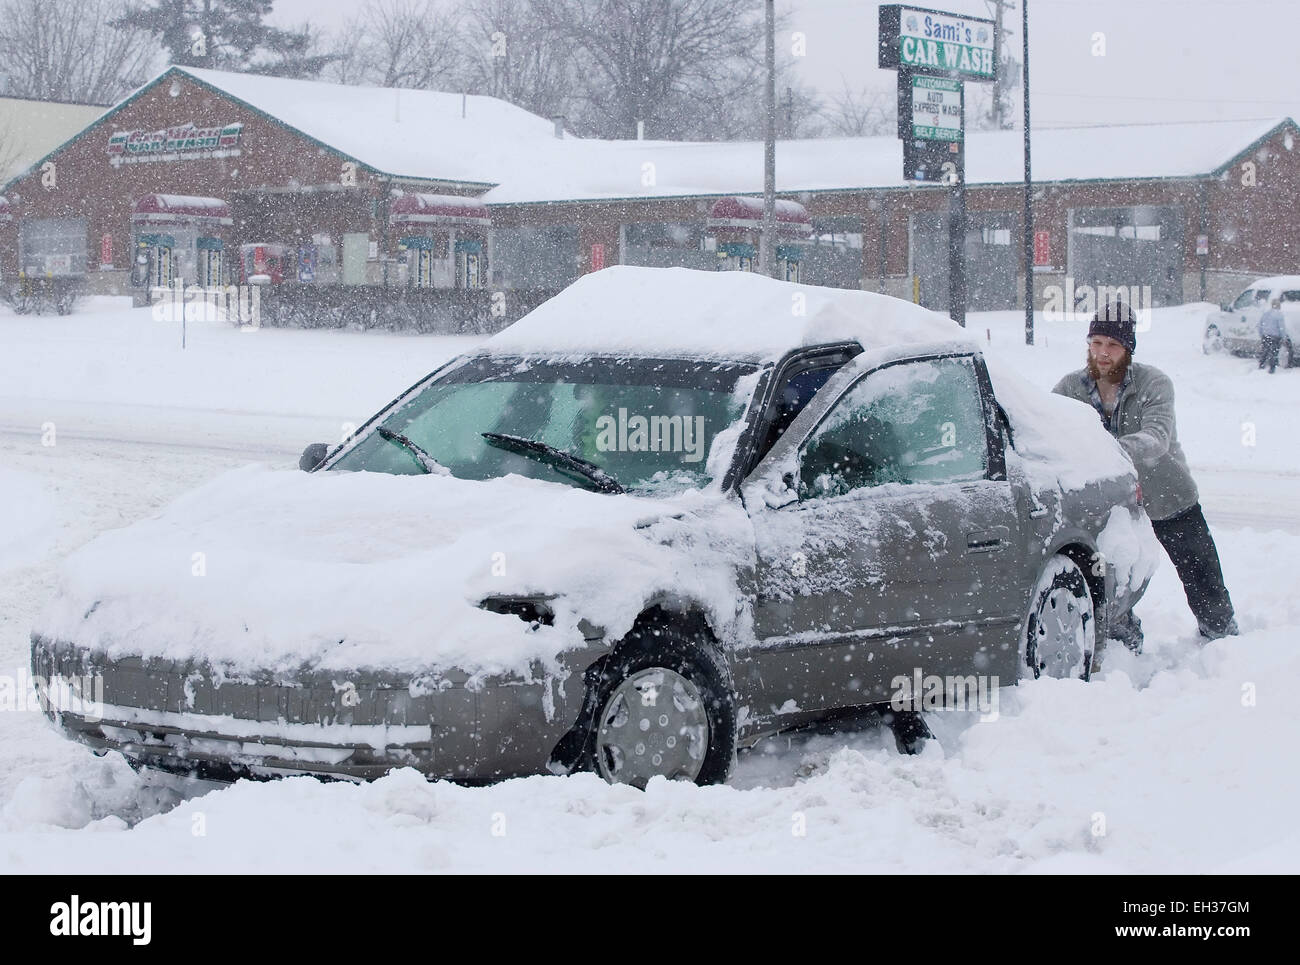 Lexington, Kentucky, USA. 05th Mar, 2015. A good Samaritan steers as an unidentified motorist pushes his car after getting stuck turning off New Circle Road into the Bryan Station Kroger shopping center on Thursday, March 5, 2015 in Lexington, KY, USA. The governor declared a statewide emergency for the second time in 17 days after a winter storm dumped up to 21 inches of snow on the state in less than 17 hours, including a new record of 17.1 inches in Lexington, Kentucky's second-largest city. (Apex MediaWire Photo by Billy Suratt) Stock Photo